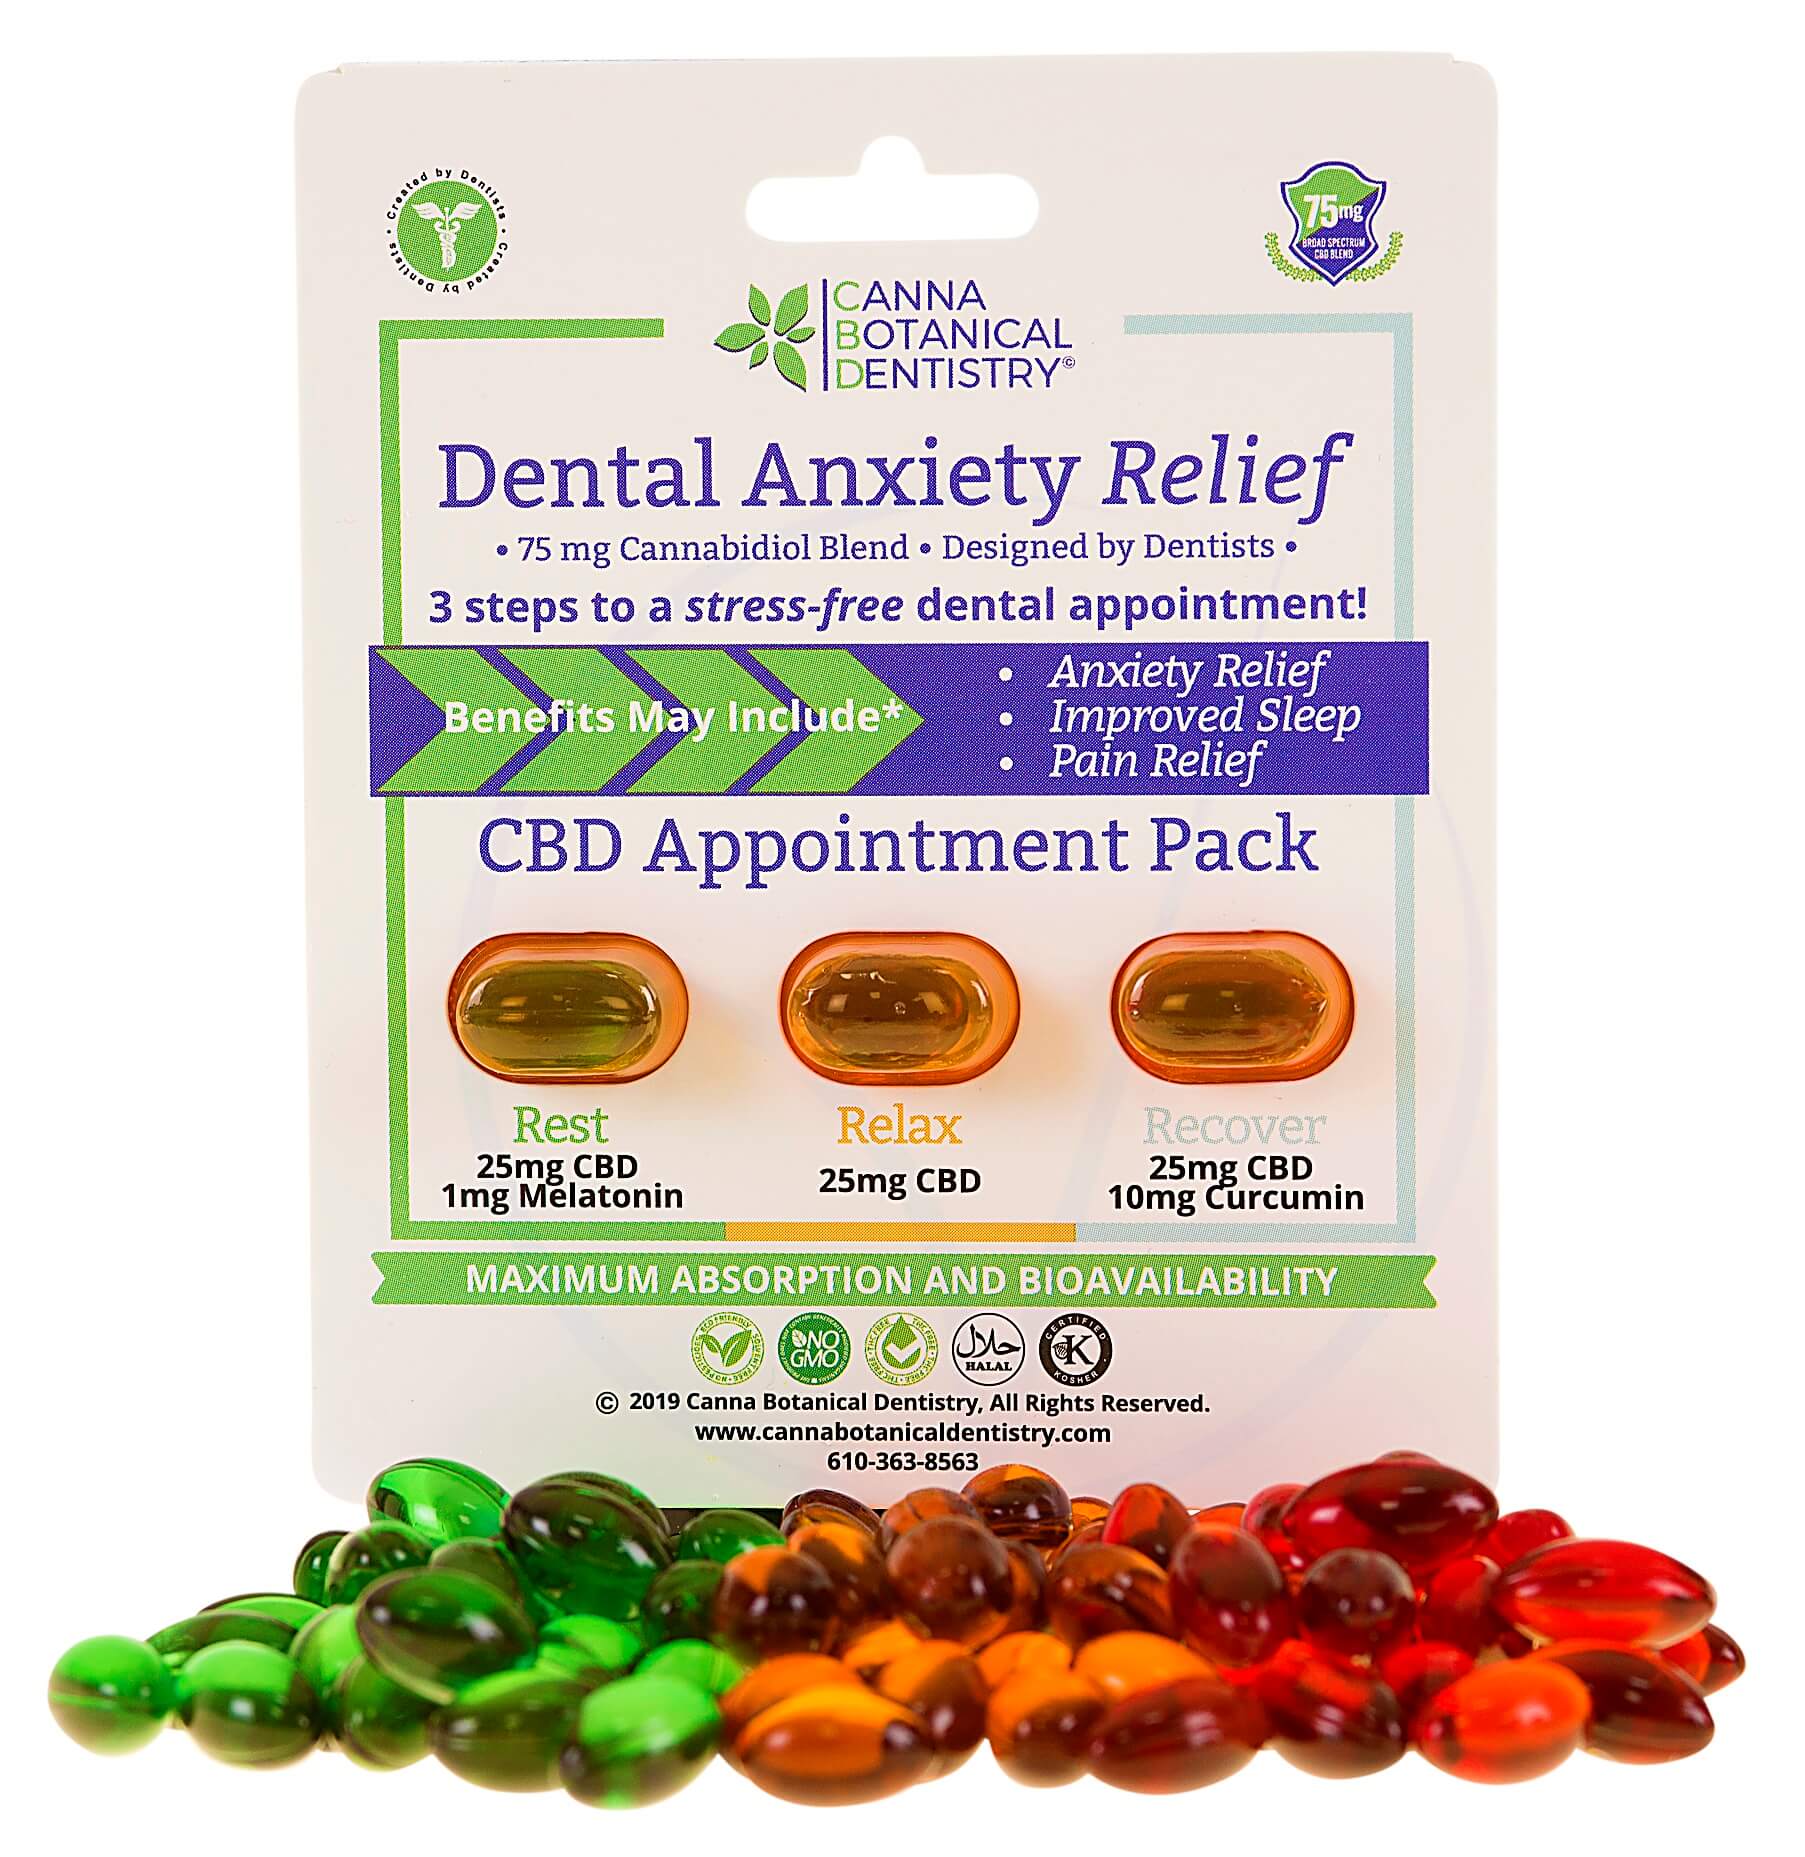 dental anxiety relief products